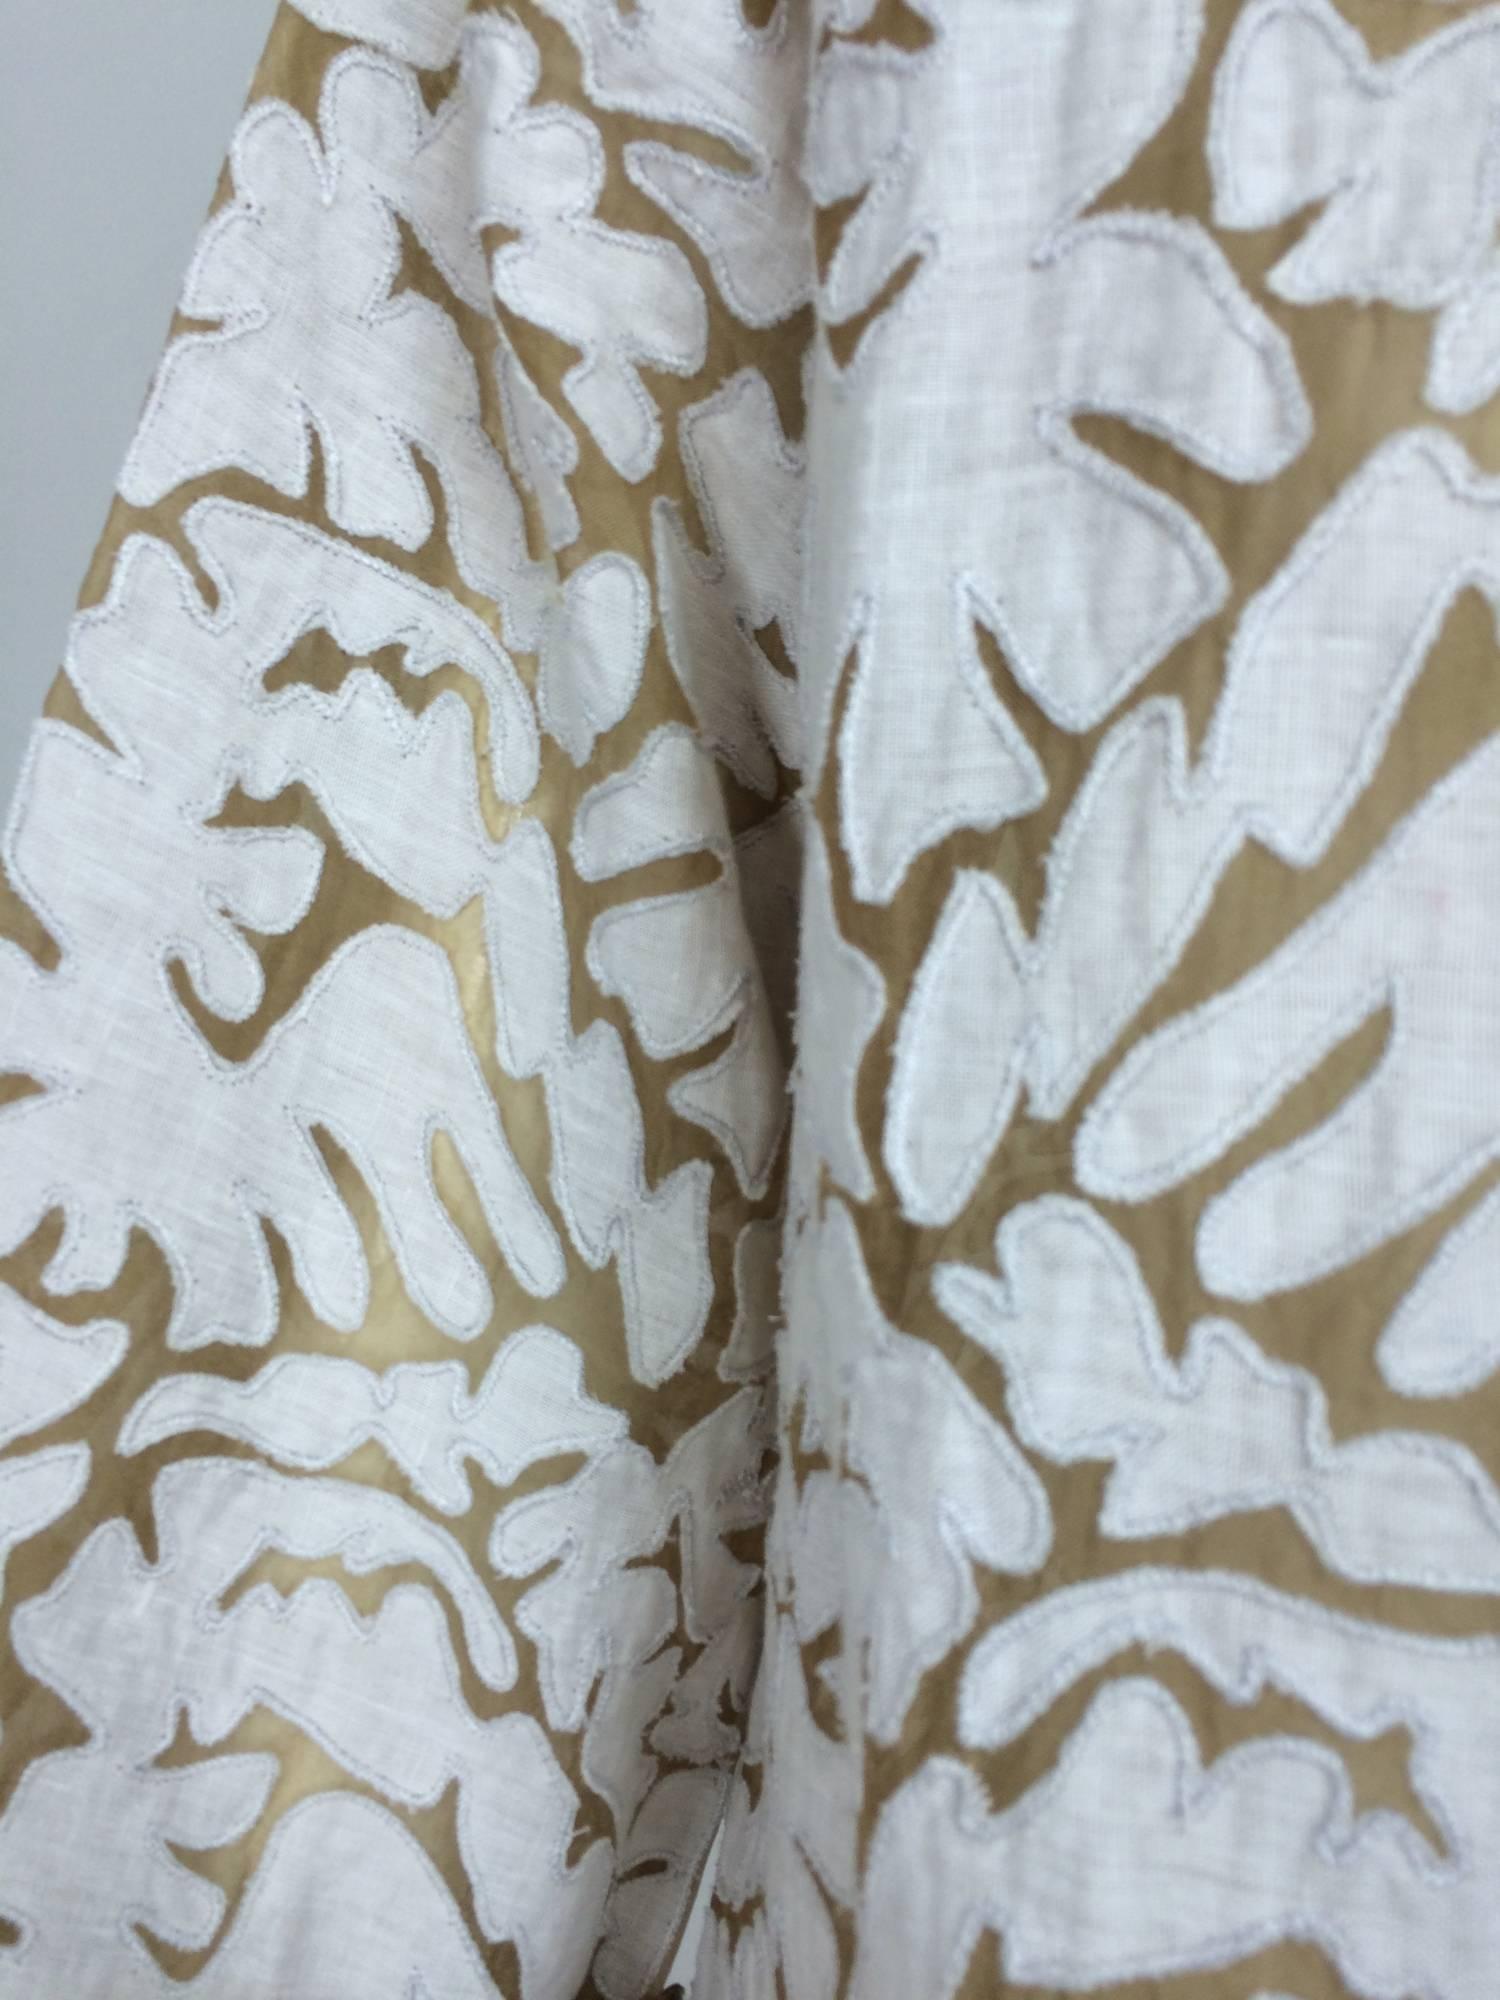 Jeannie McQueeny Cocoa silk organza & linen applique jacket XL...Intricately appliqued in off white linen on cocoa silk organza, this open front jacket is pretty outrageous...Light and perfect for evenings in the tropics or air conditioned